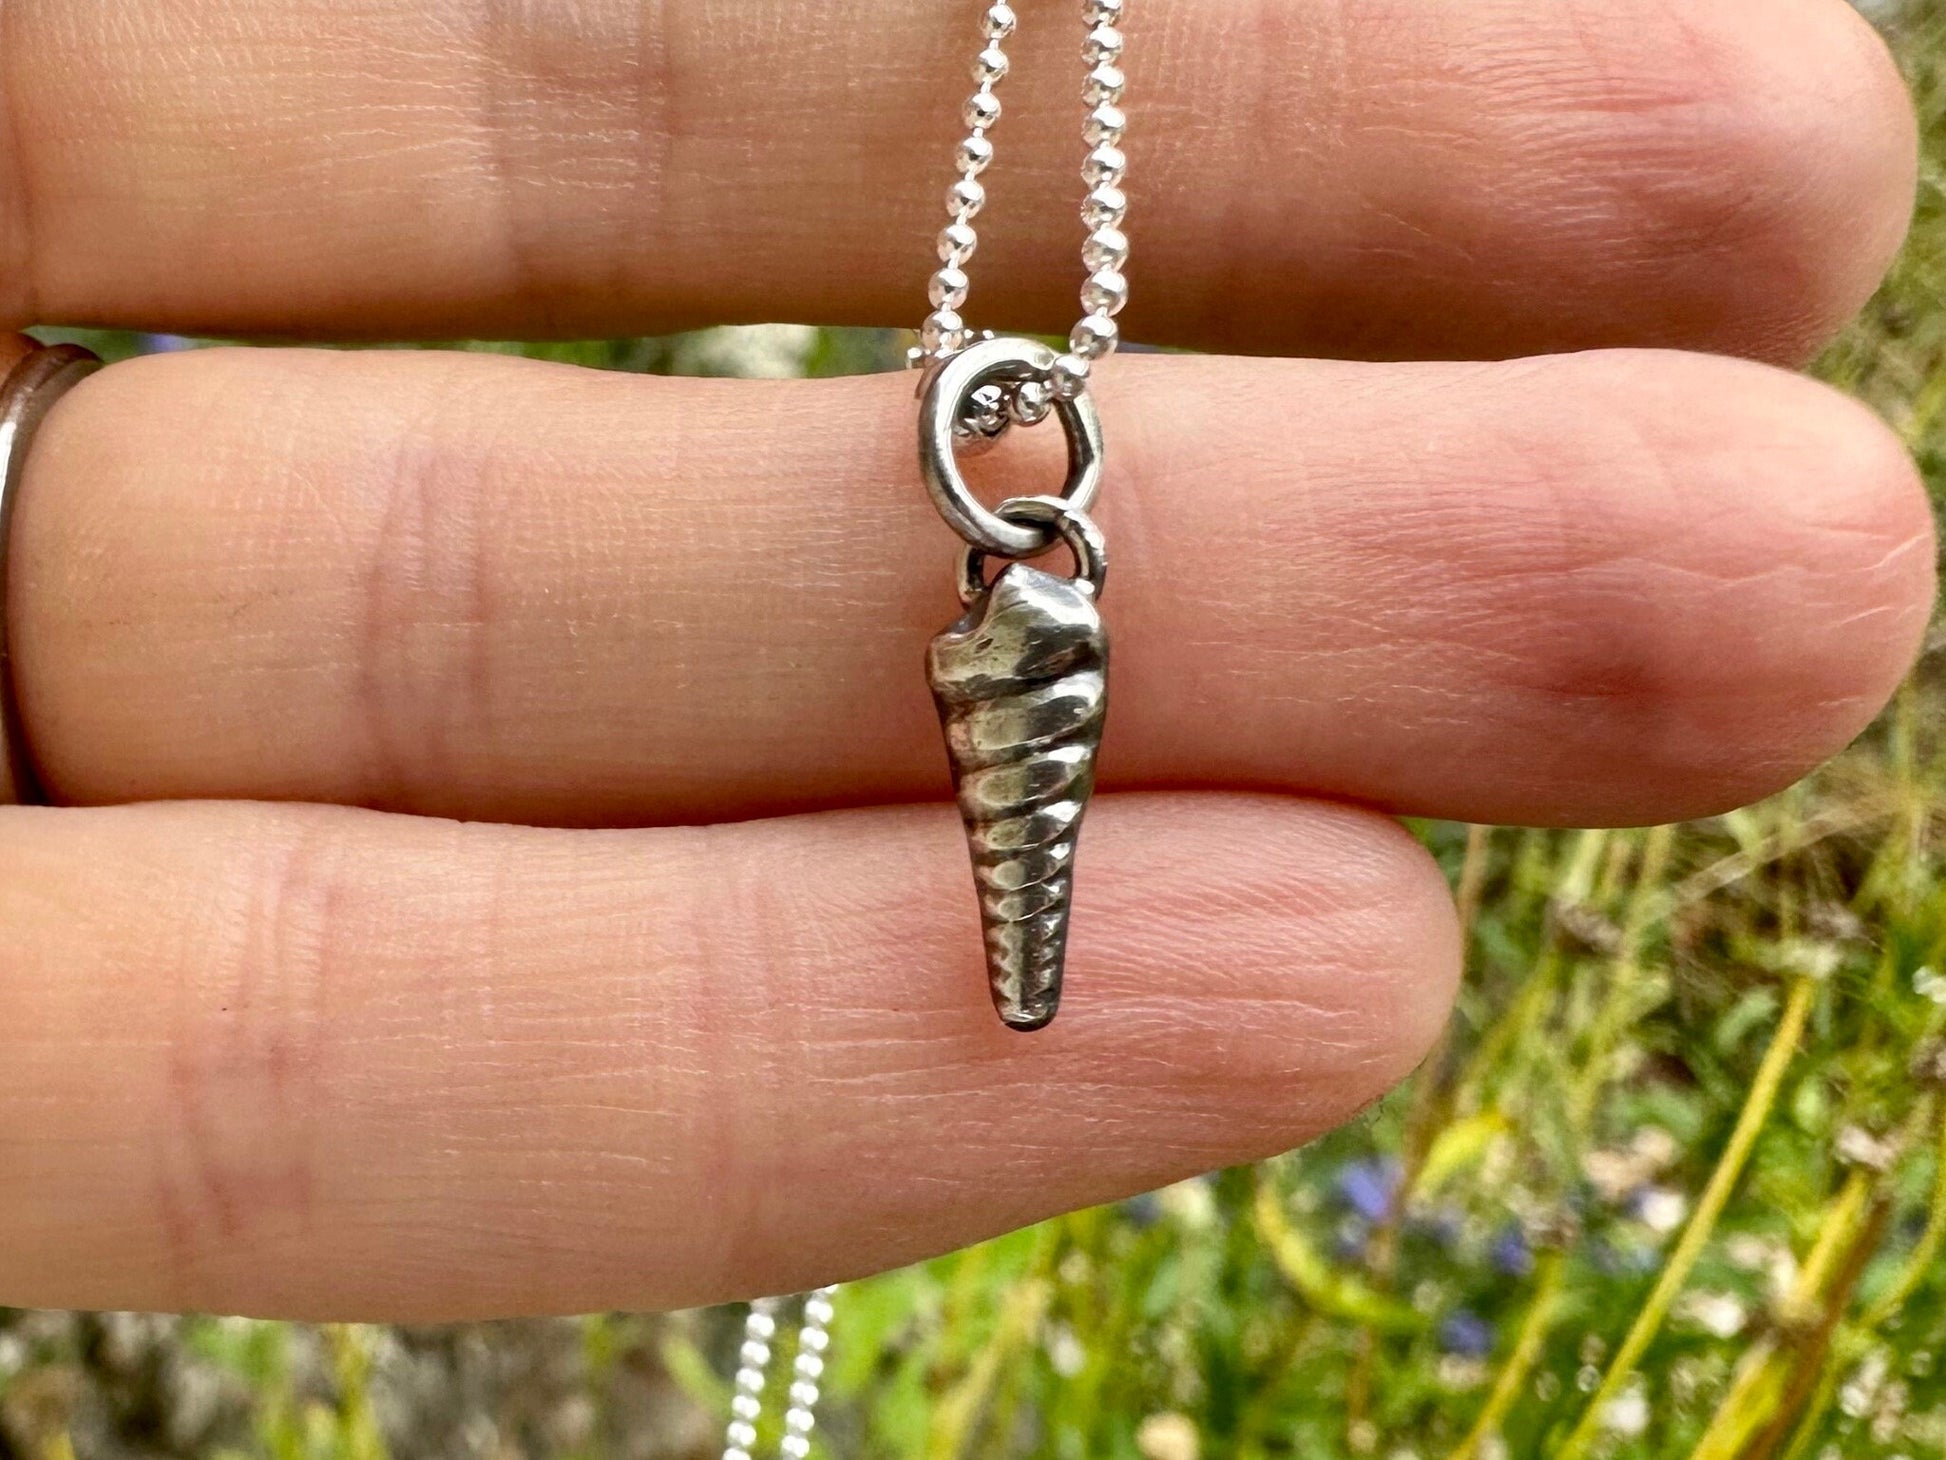 Rustic Sterling Silver Turritella Seashell pendant charm necklace, handmade from recycled 925 Sterling Silver, made to order